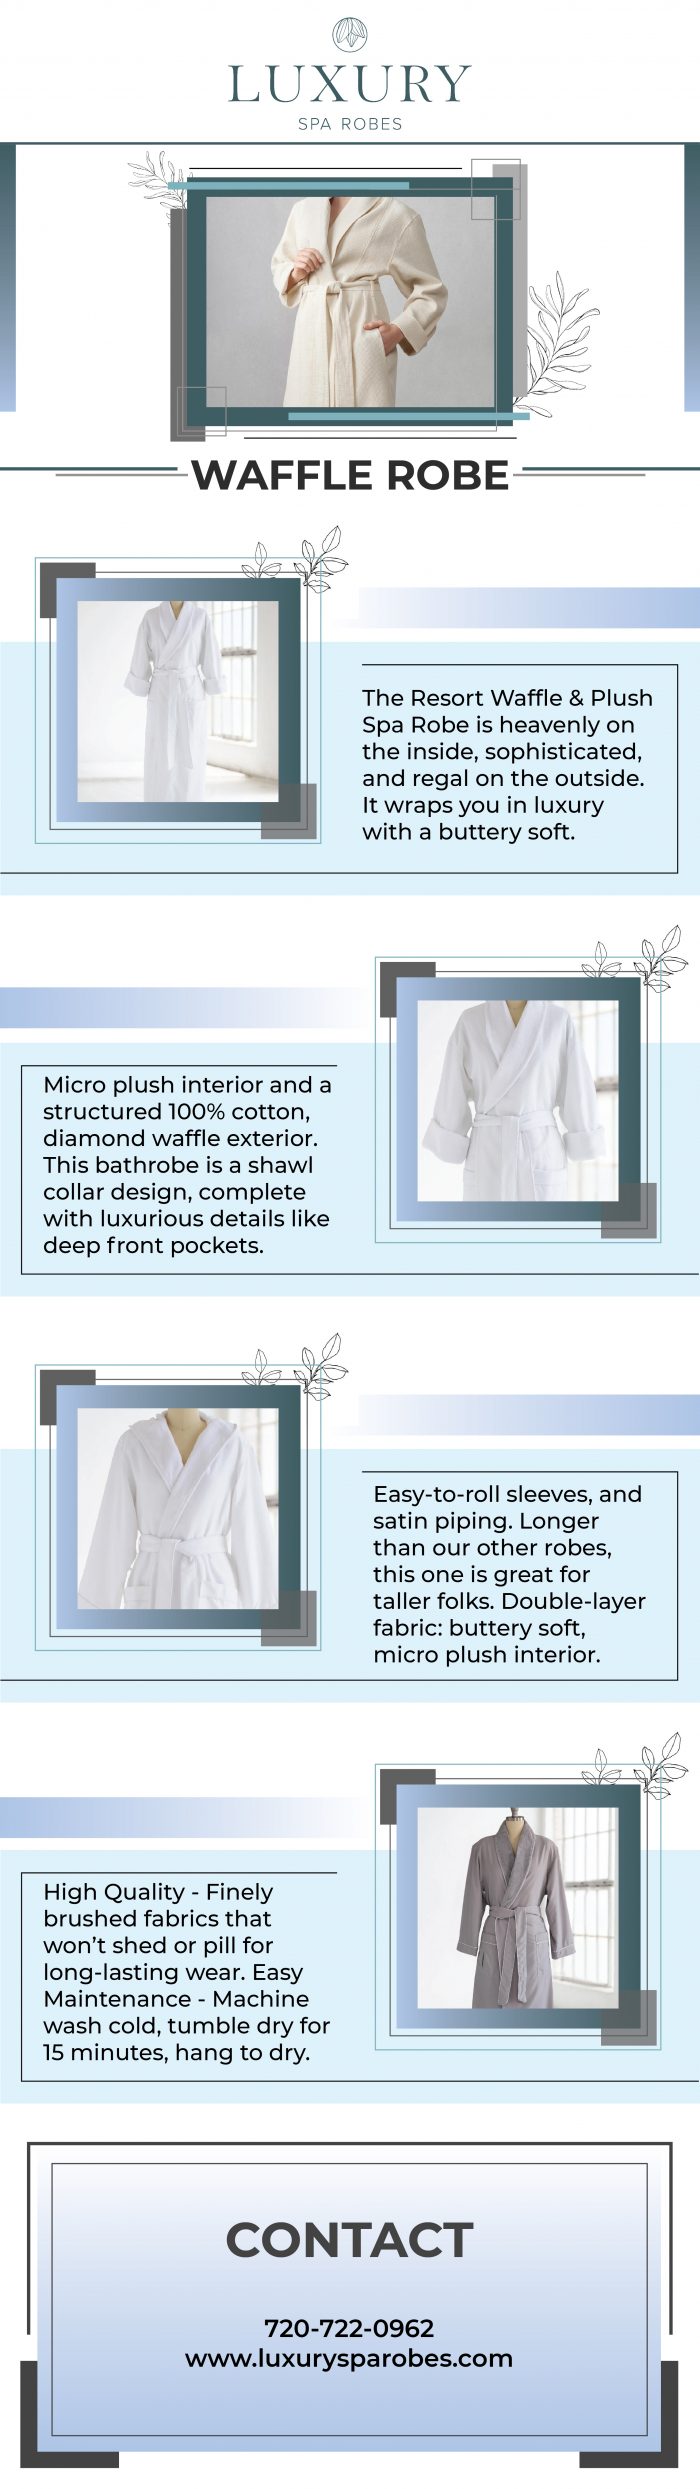 Stylish waffle robes for you at